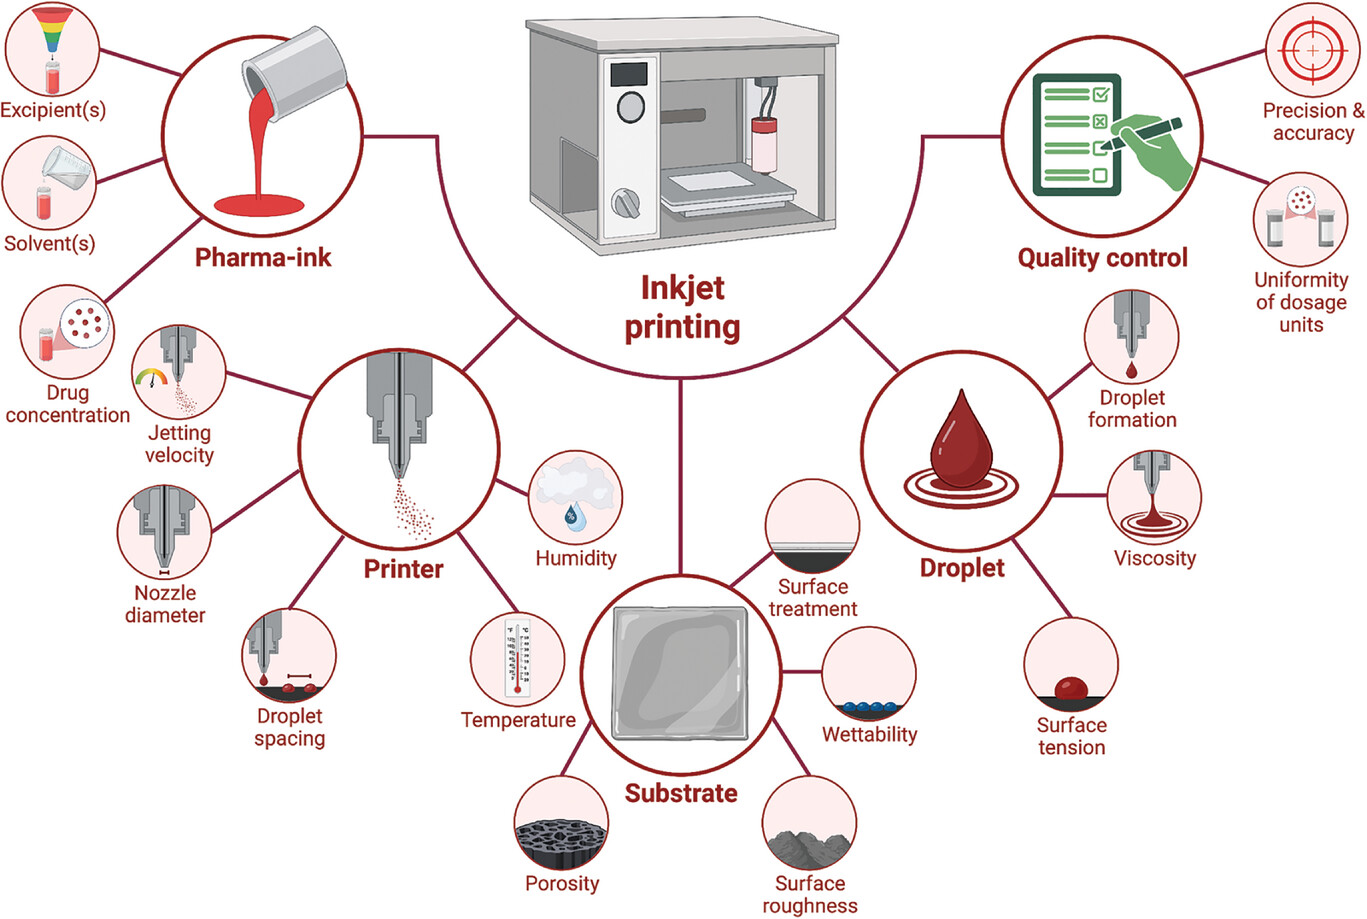 the critical processing parameters involved in a pharmaceuticals inkjet printing process